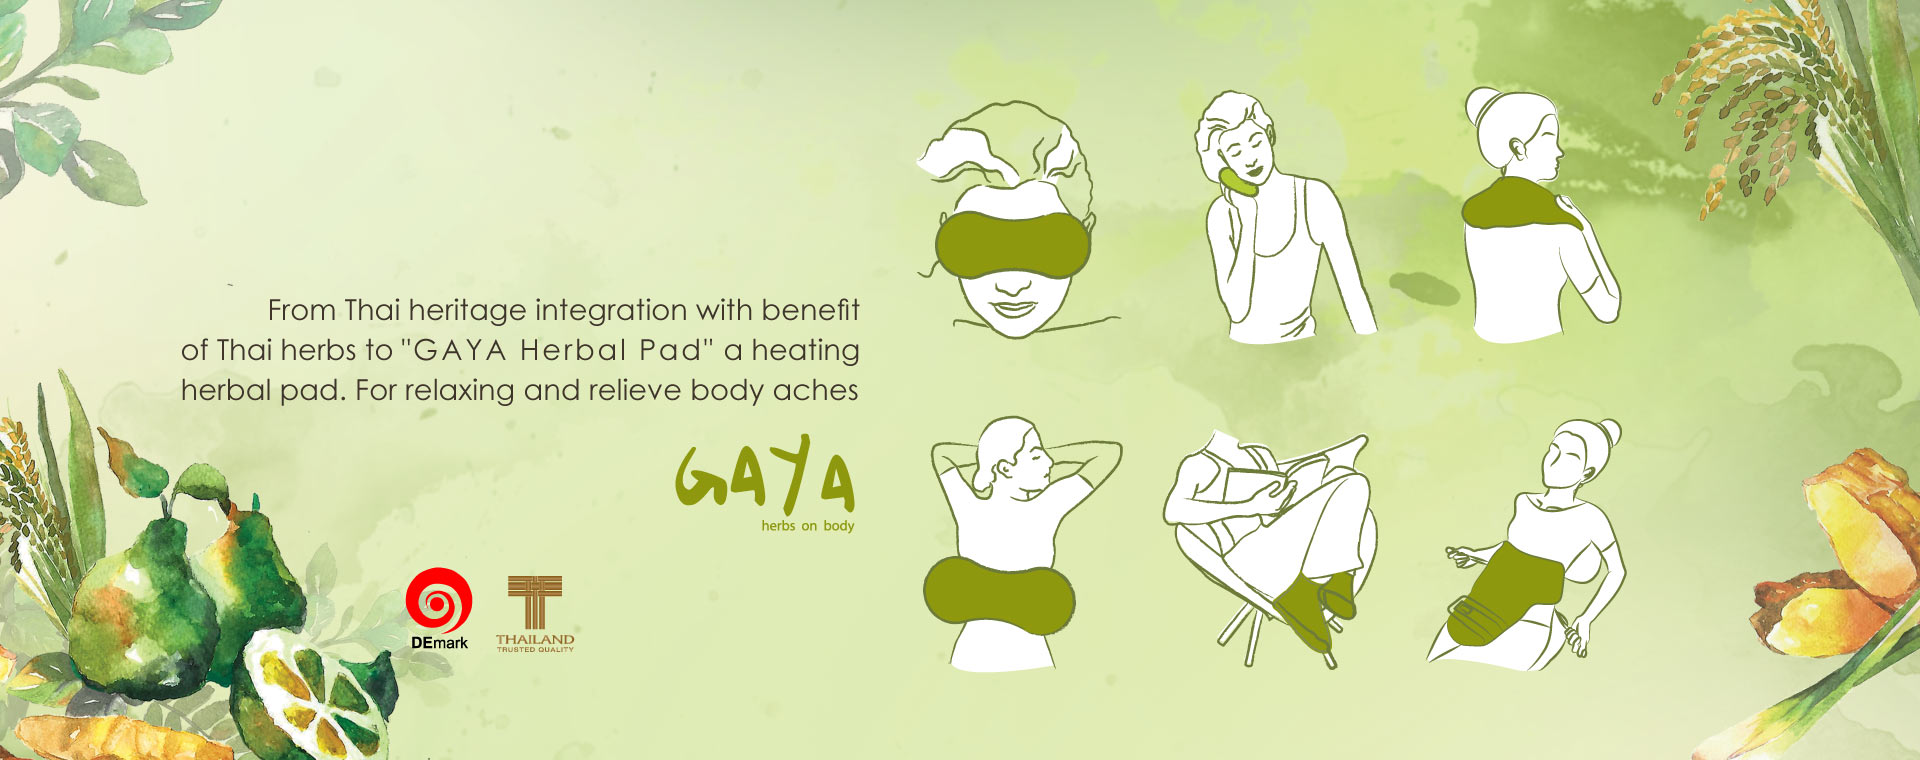 GAYA Herbal Pad, Heating herbal pad for pain relief and muscle relaxation.